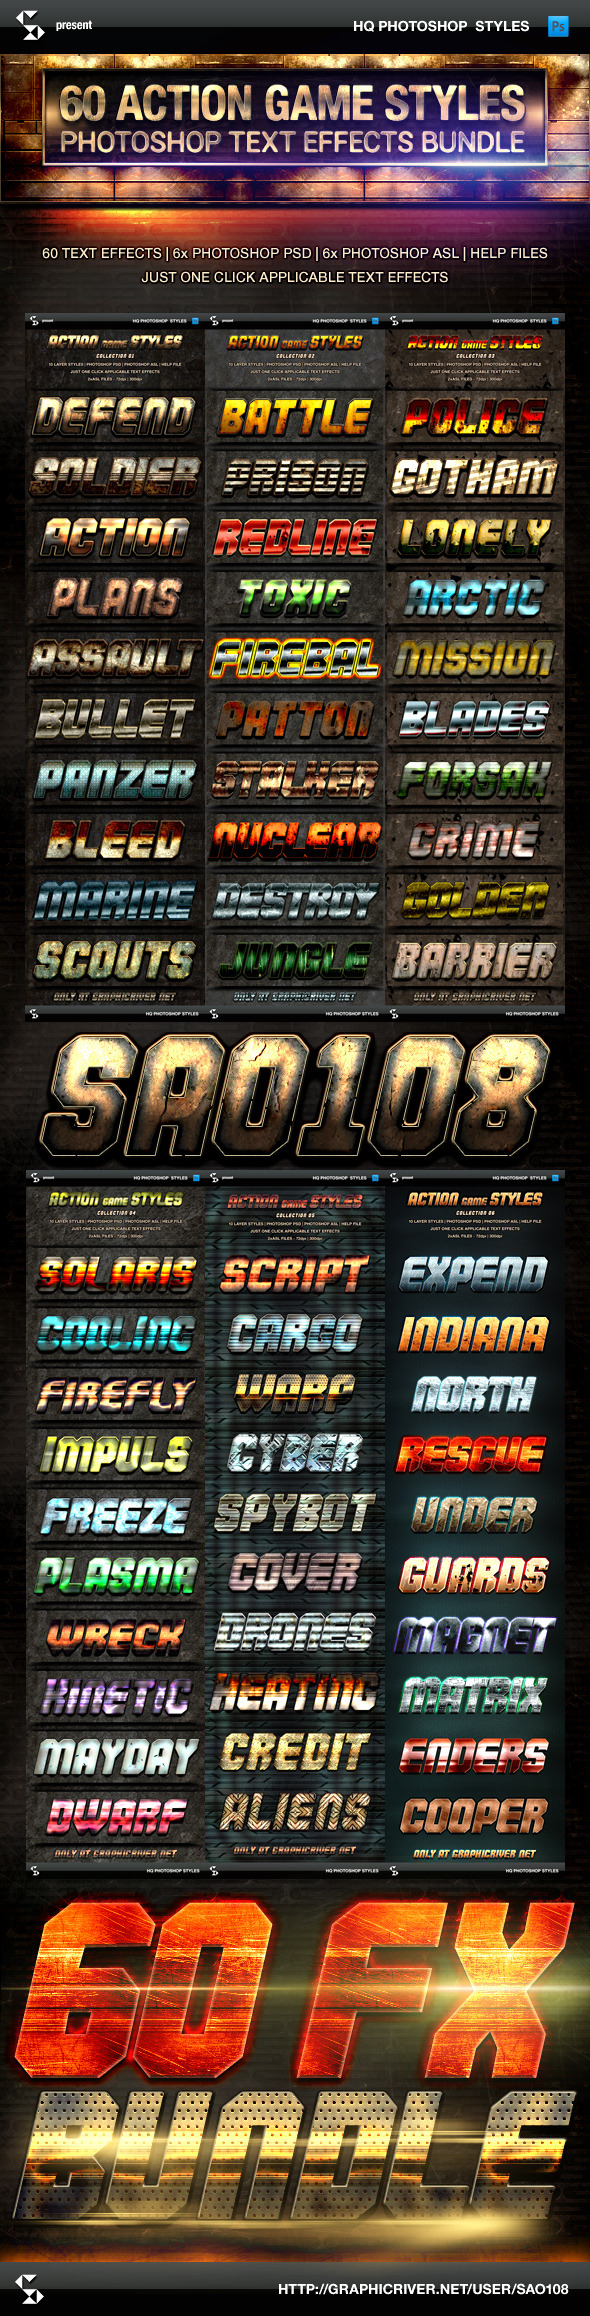 Action Game Styles Bundle - 60 Text Effects